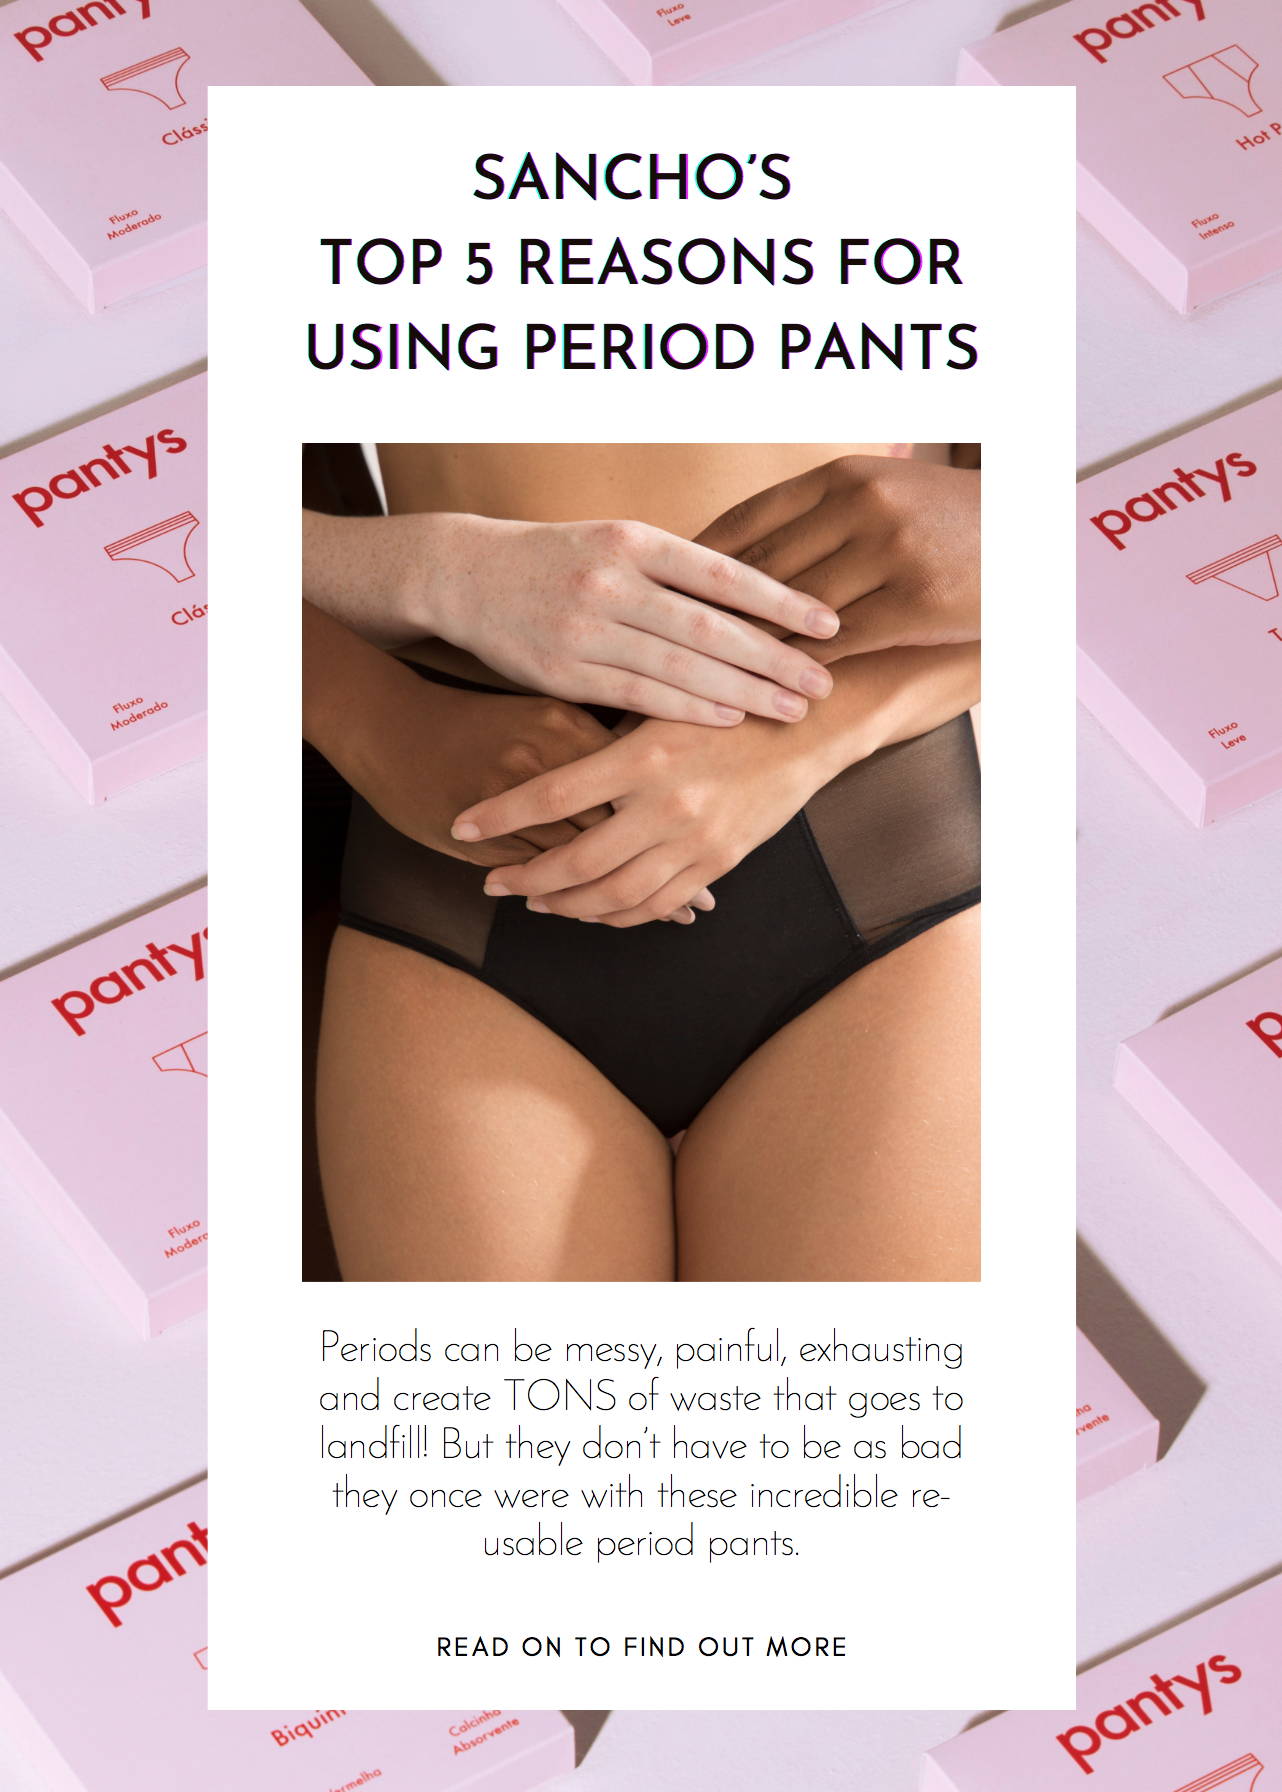 Sancho’s top 5 reasons for using period pants